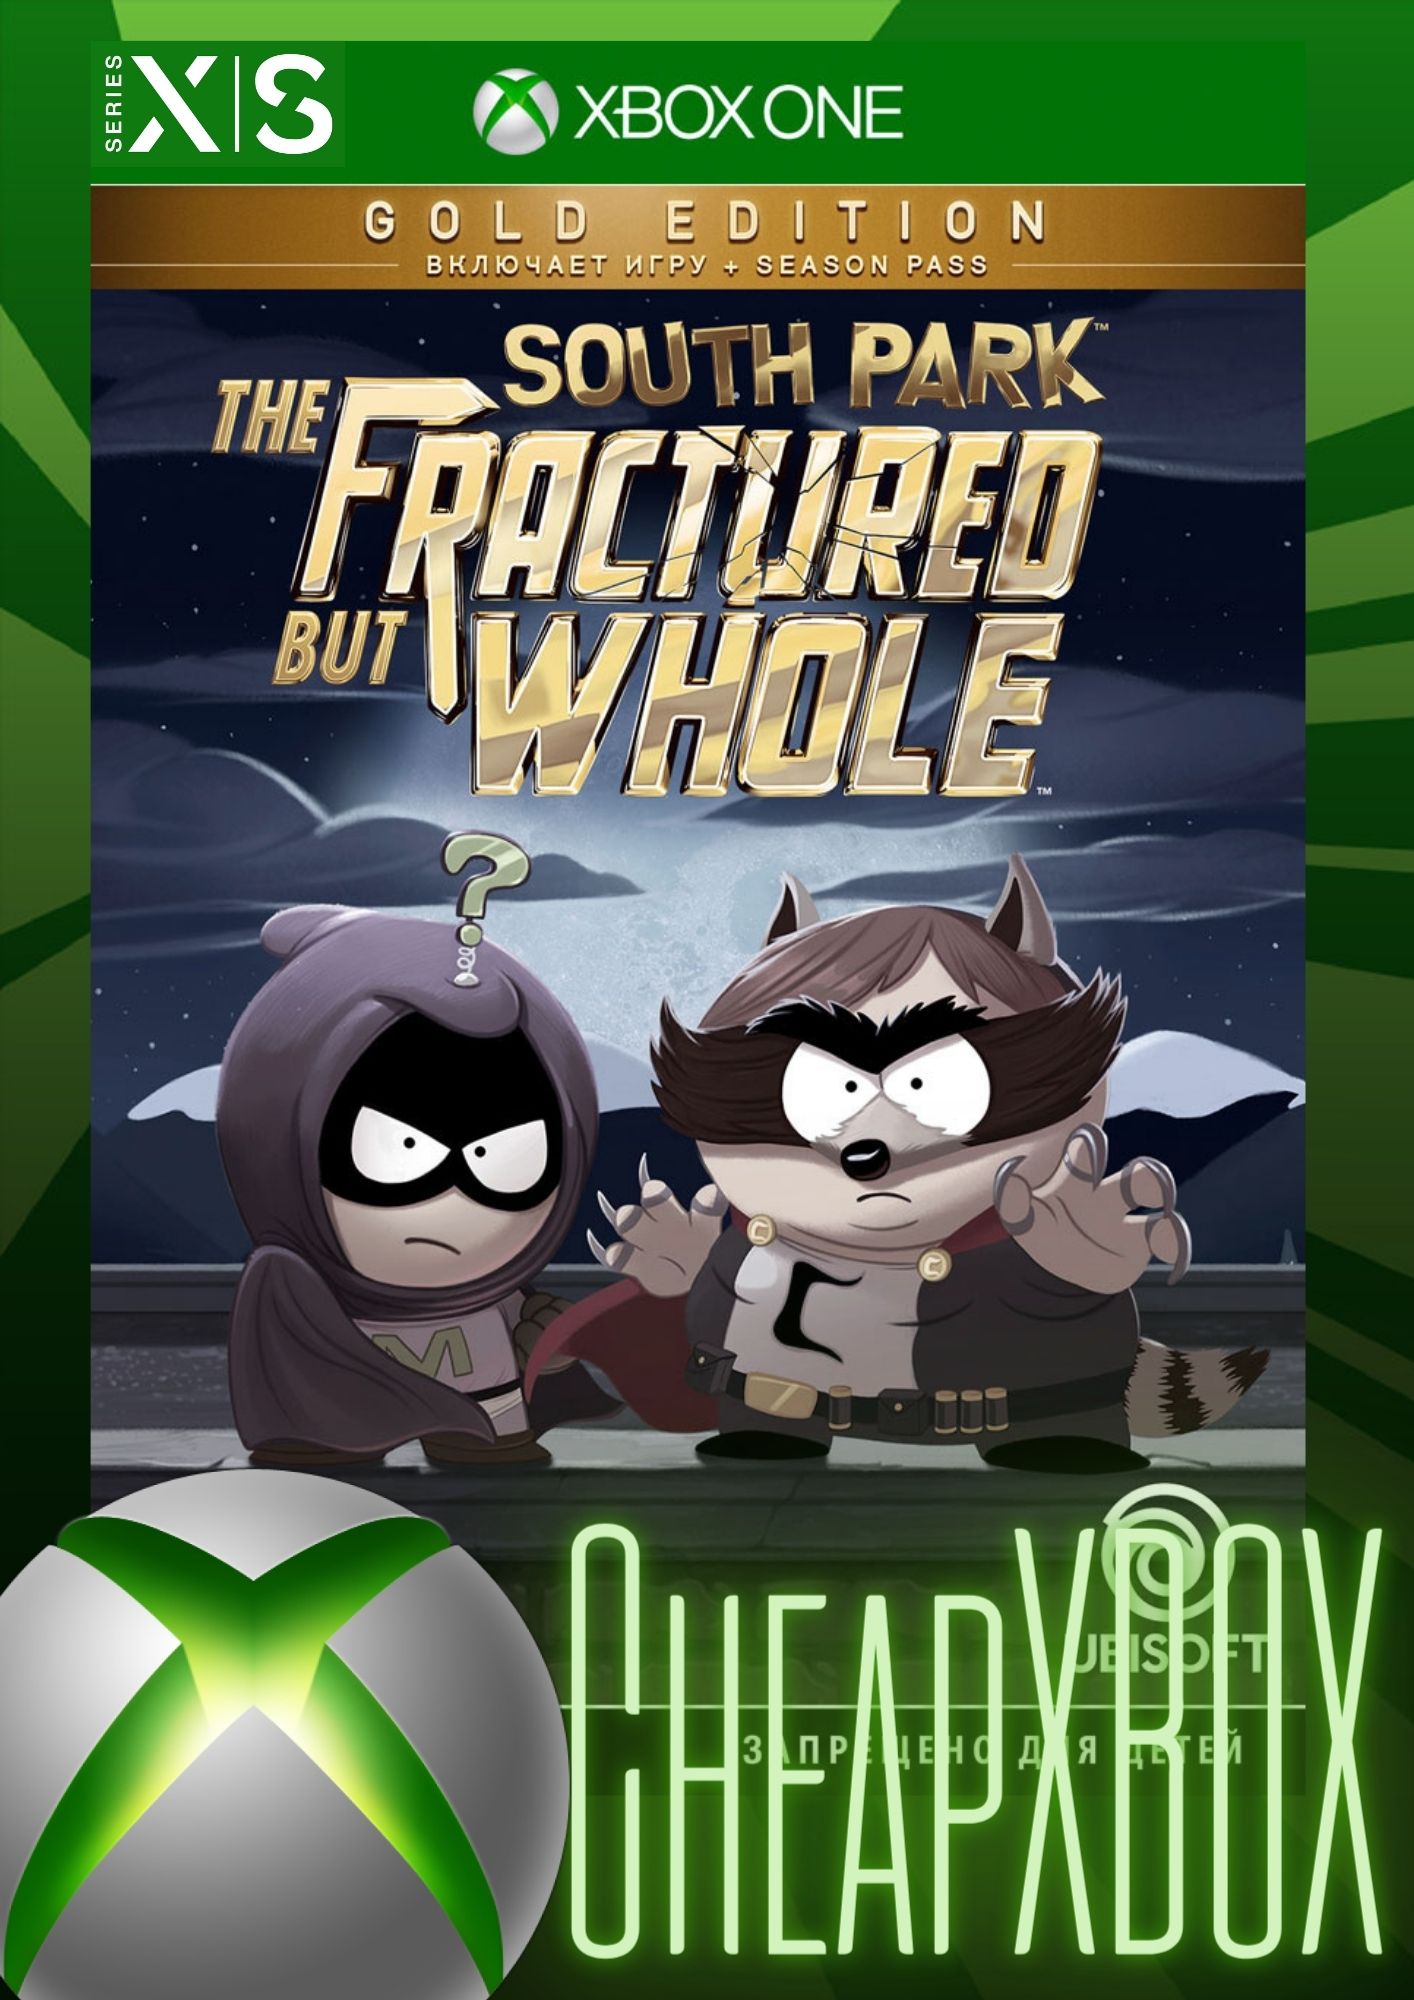 South park the fractured but whole купить ключ steam дешево фото 4